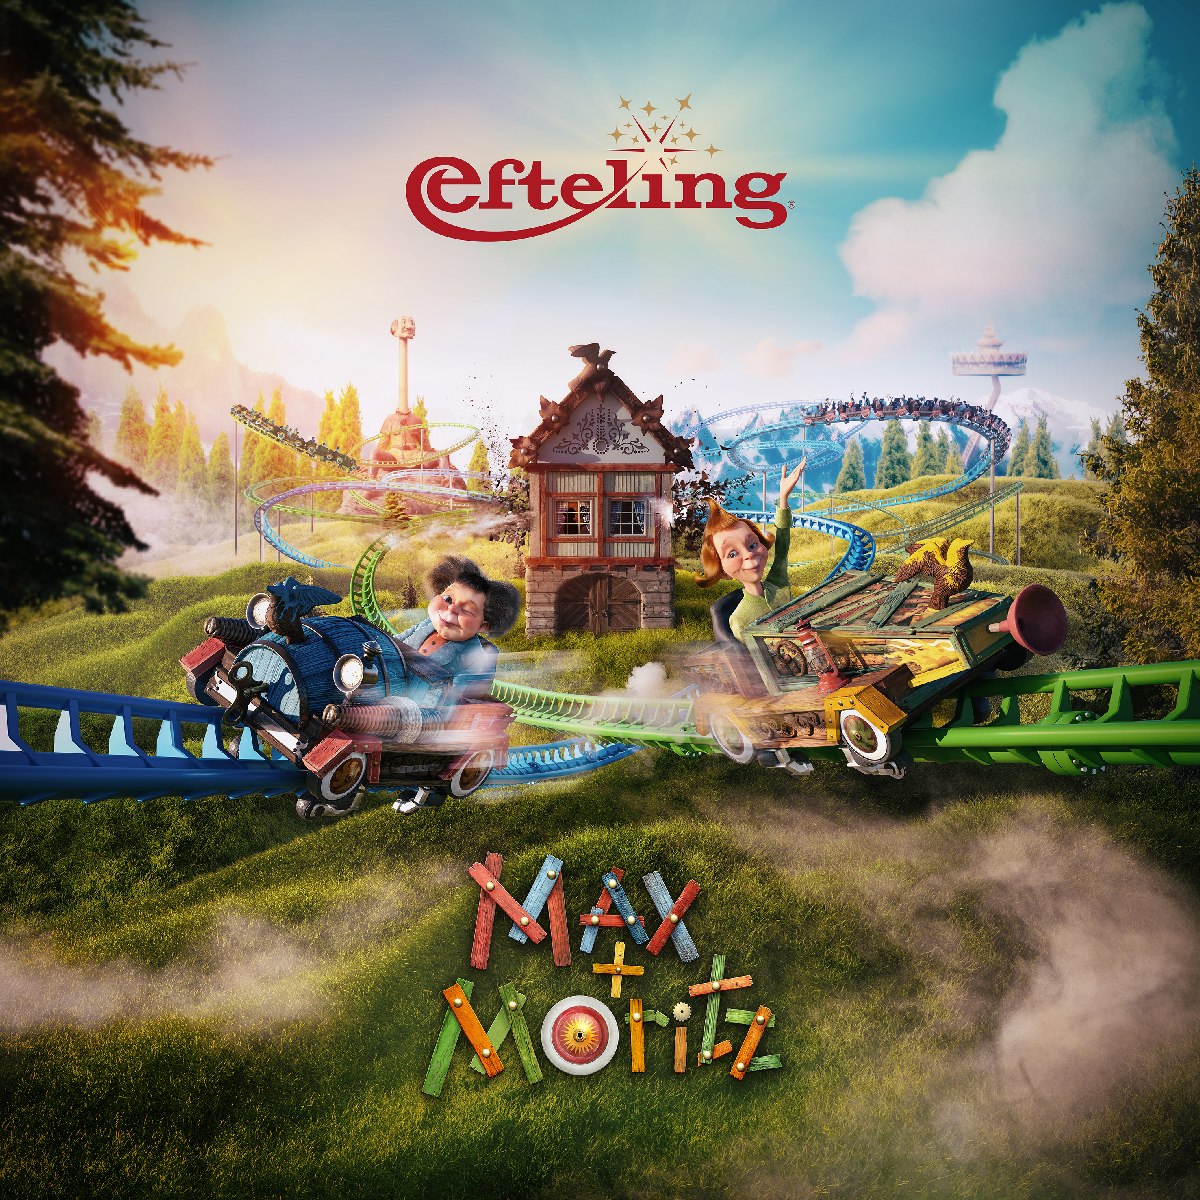 The Rascals Are Ready This Summer in Efteling